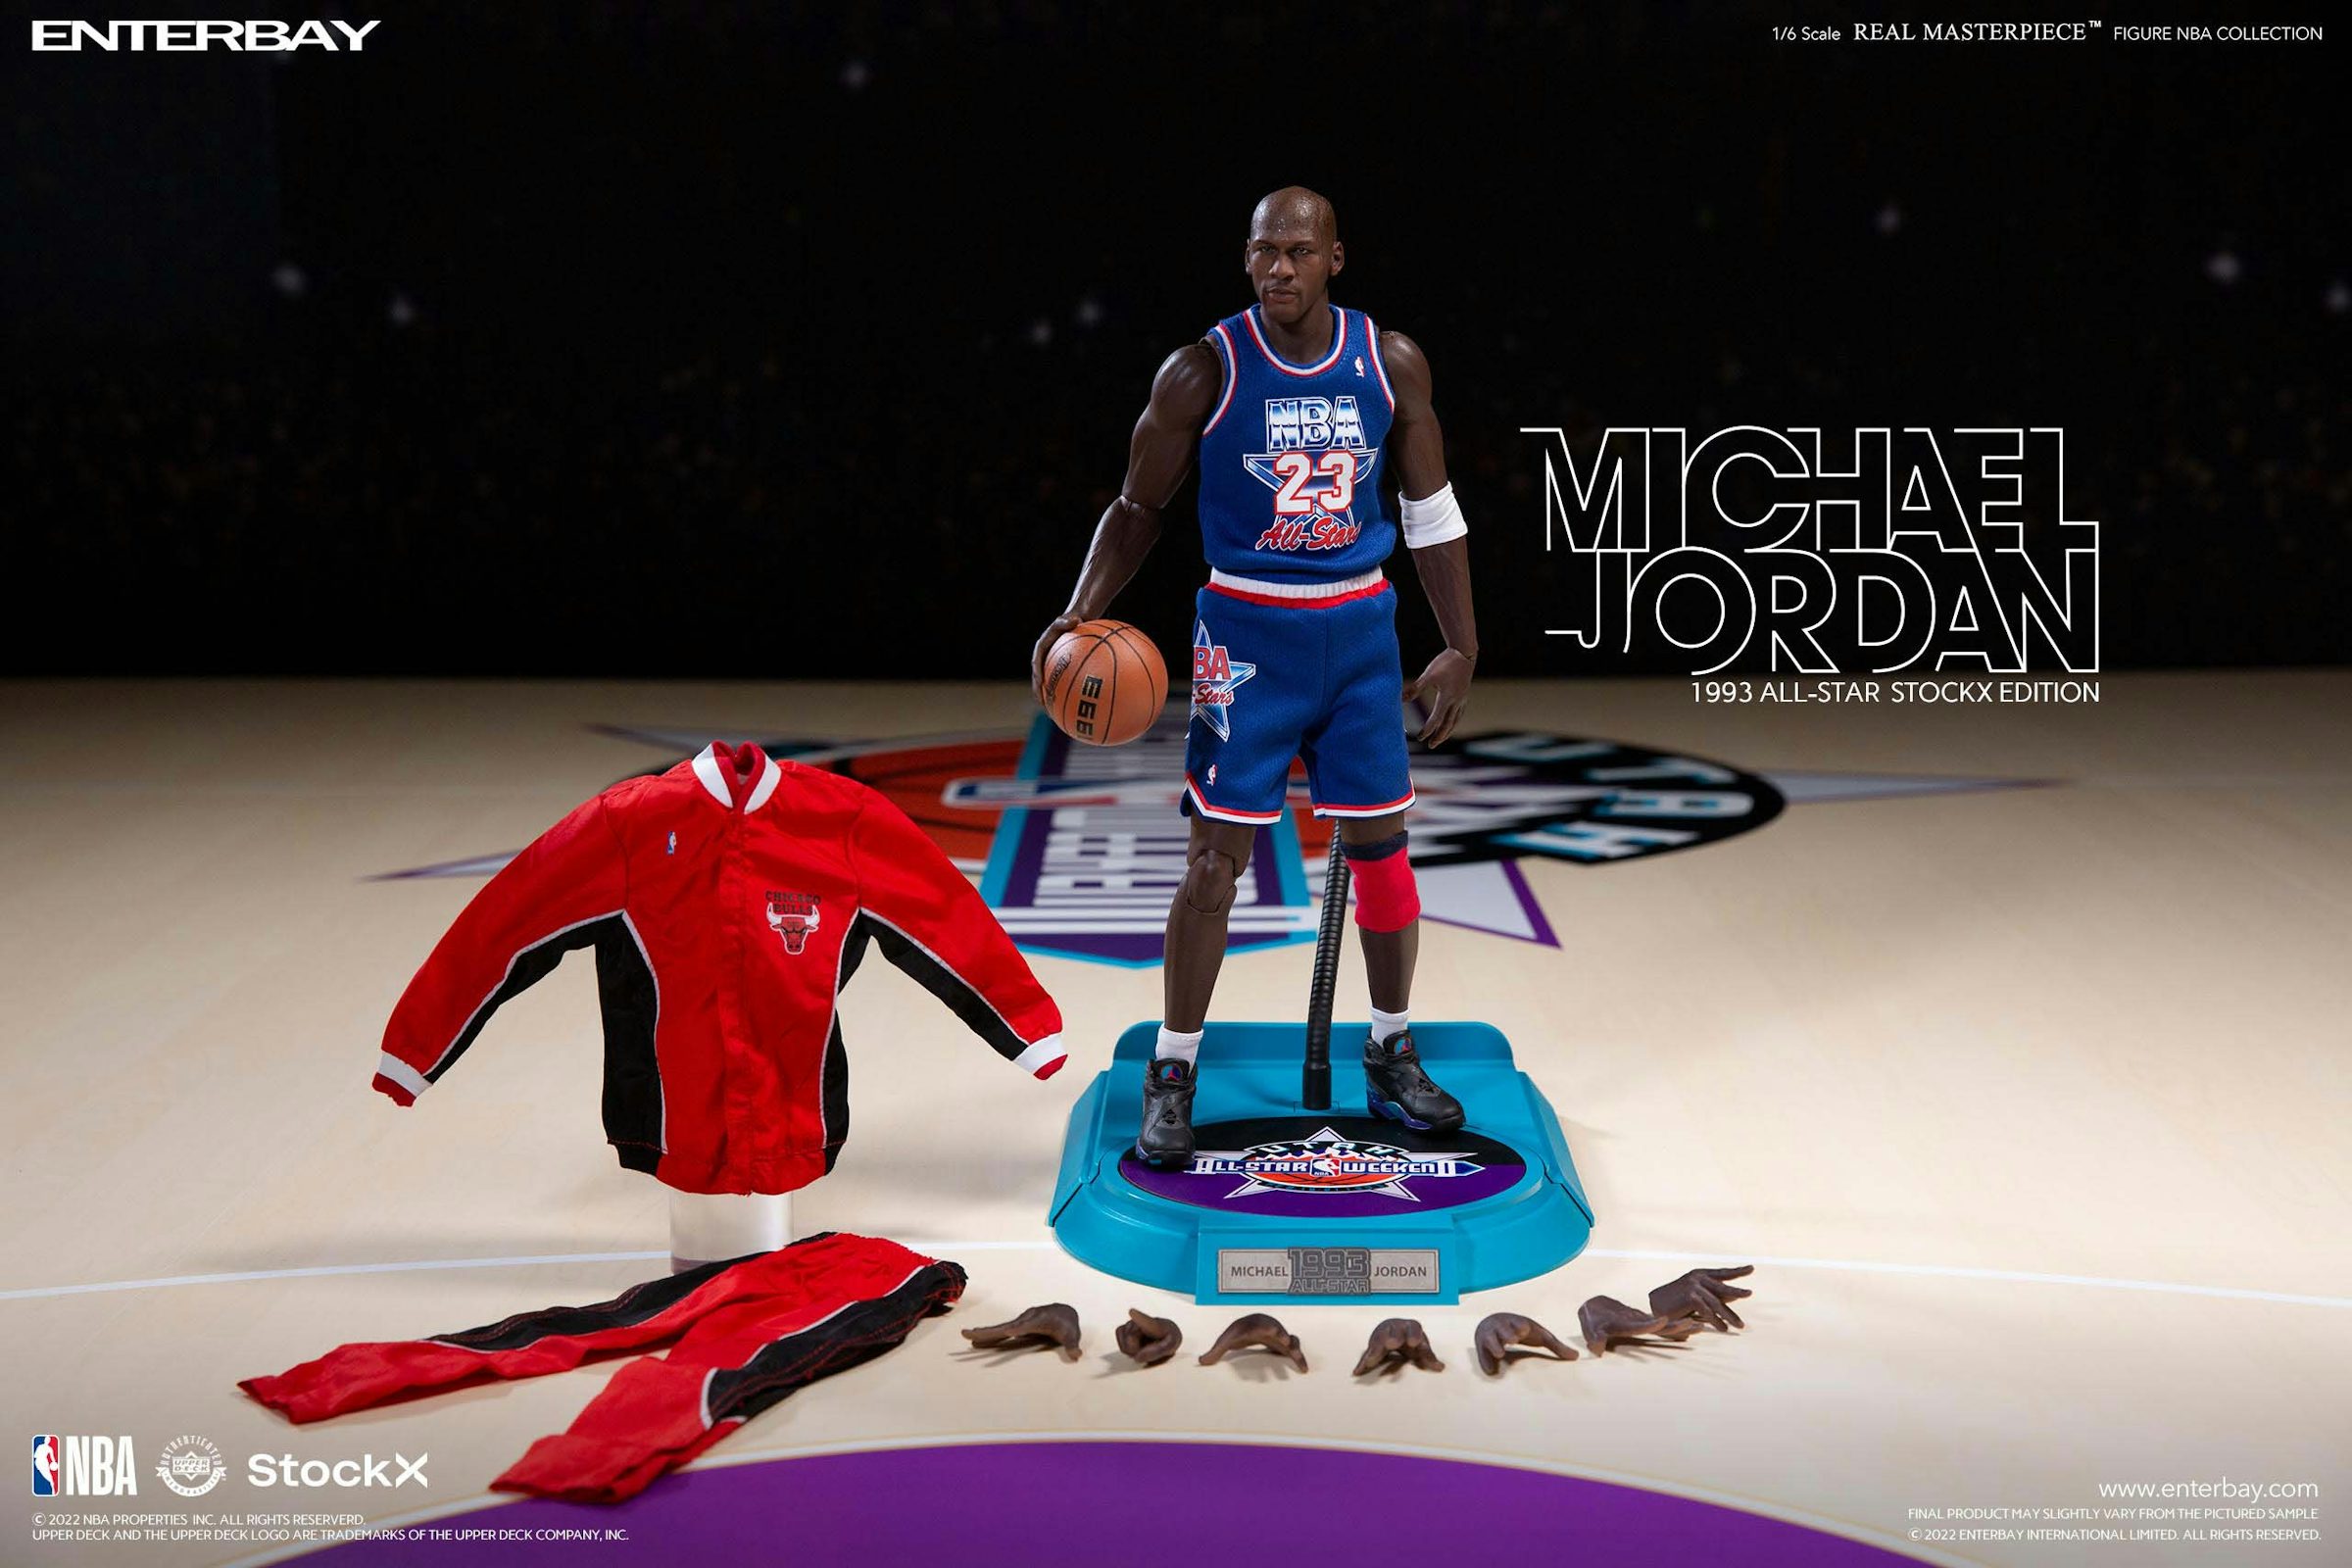 Enterbay Just Released The 1996 All-Star Game Michael Jordan